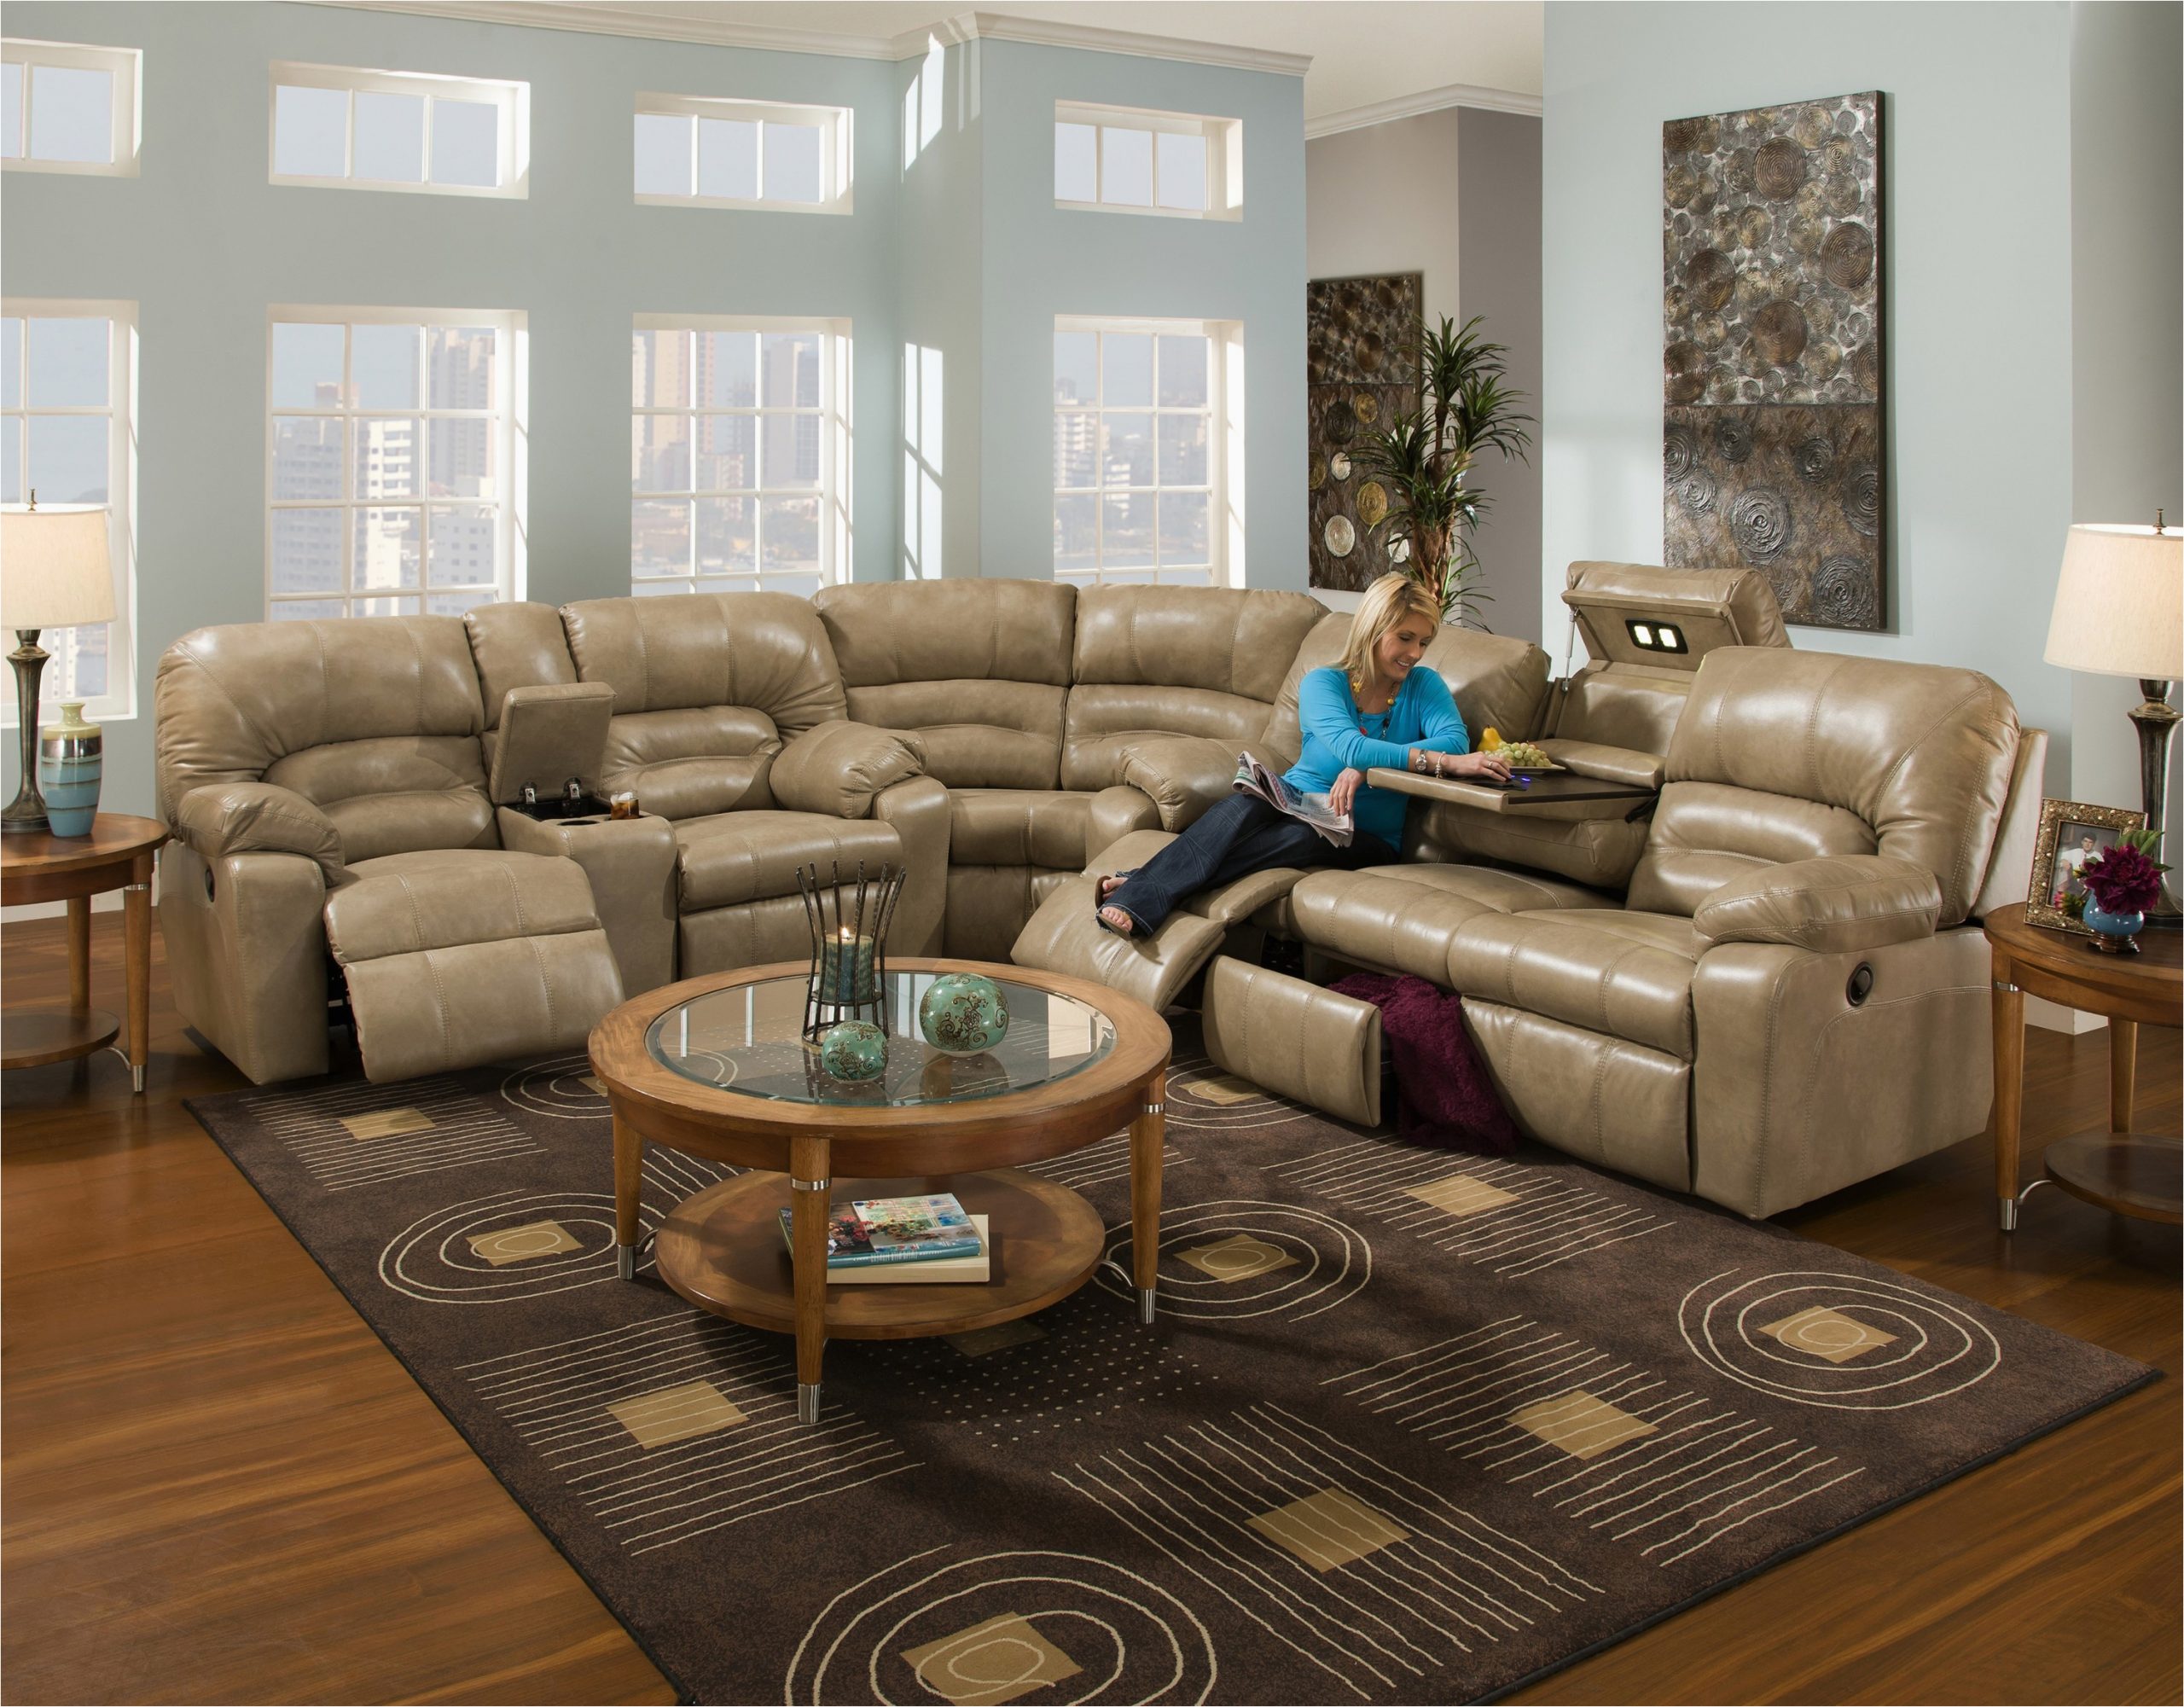 Area Rug for Sectional Couch How to Place A Rug Under Sectional sofa area Rug Ideas